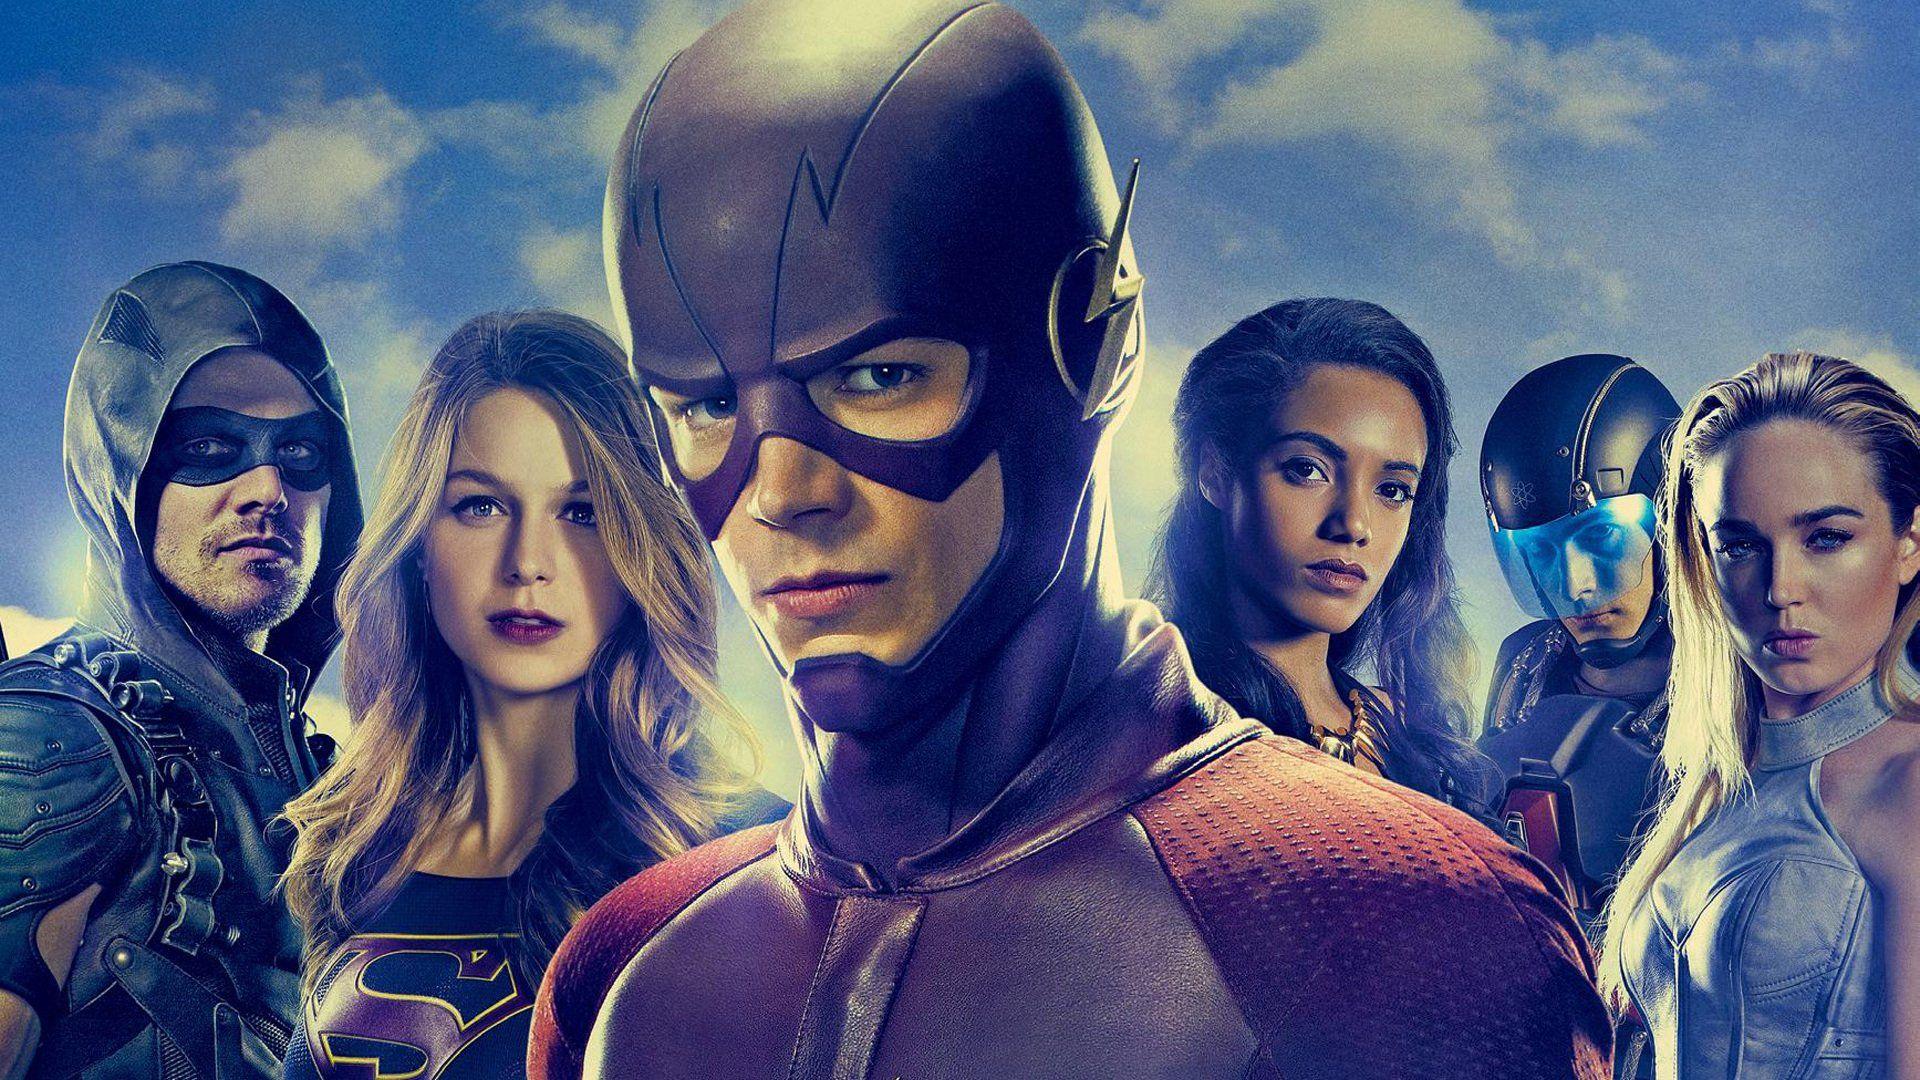 Arrowverse Wallpapers Wallpaper Cave Search free wallpapers 4k wallpapers on zedge and personalize your phone to suit you. arrowverse wallpapers wallpaper cave